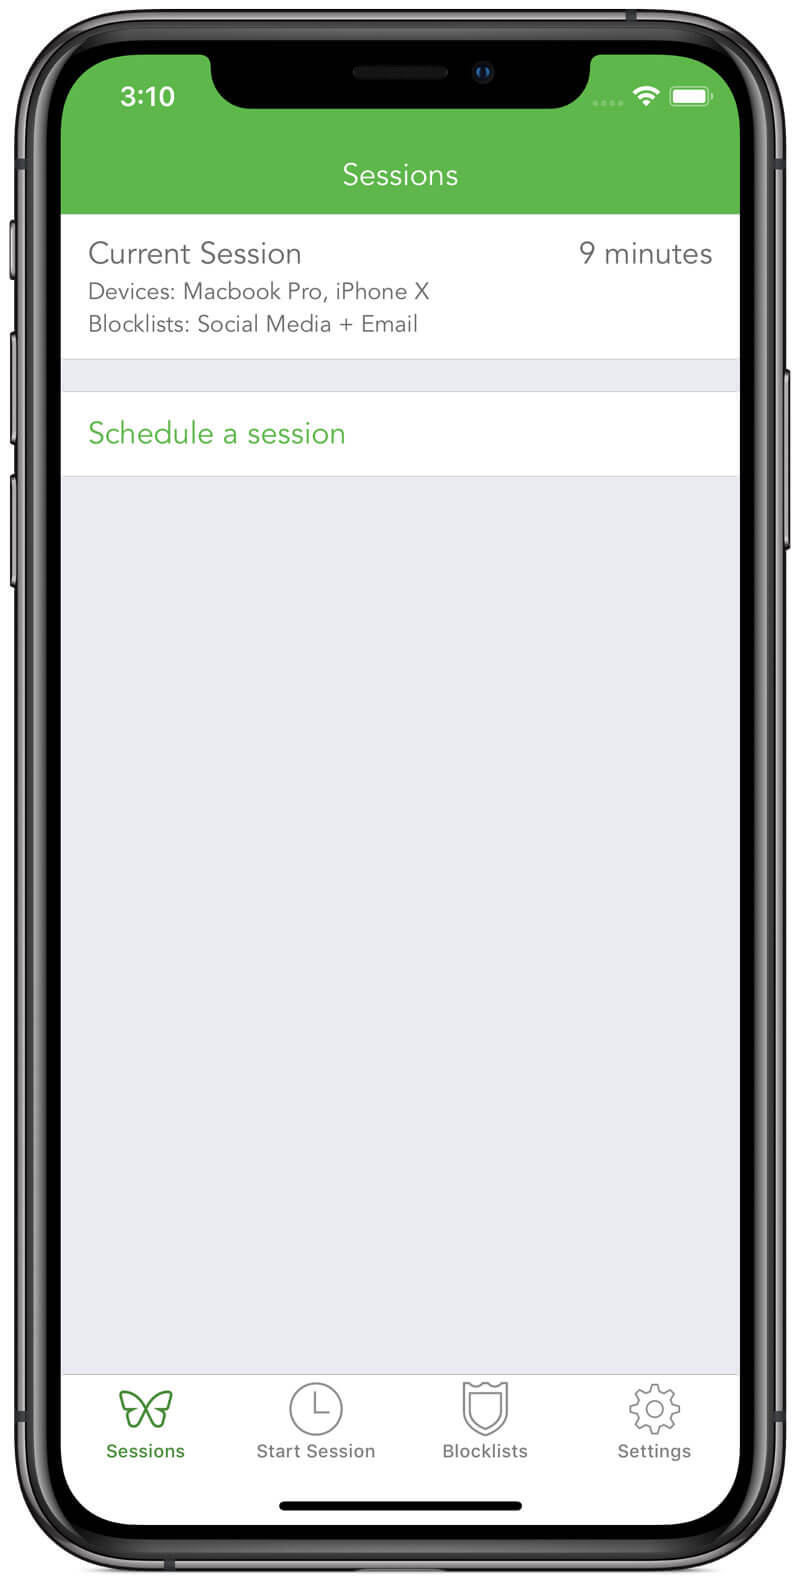 A screenshot showing one active session that is running on your Macbook Pro and iPhone X, blocking social media and email. A countdown indicates that there are 9 minutes remaining before the session ends.